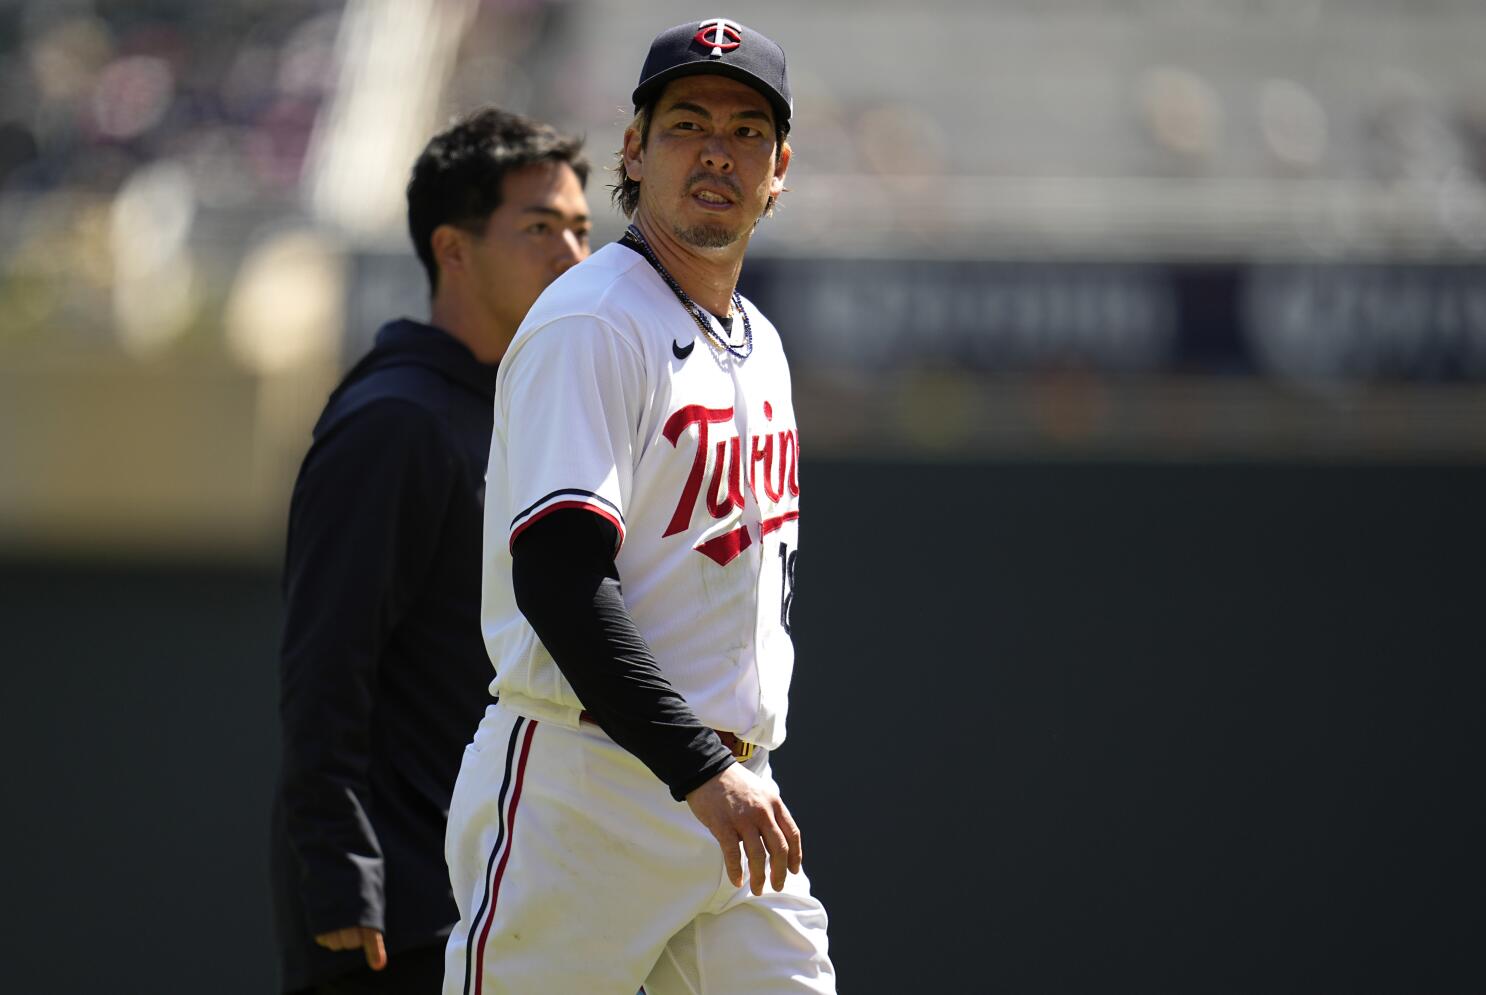 Twins Pitcher Maeda Done For The Season